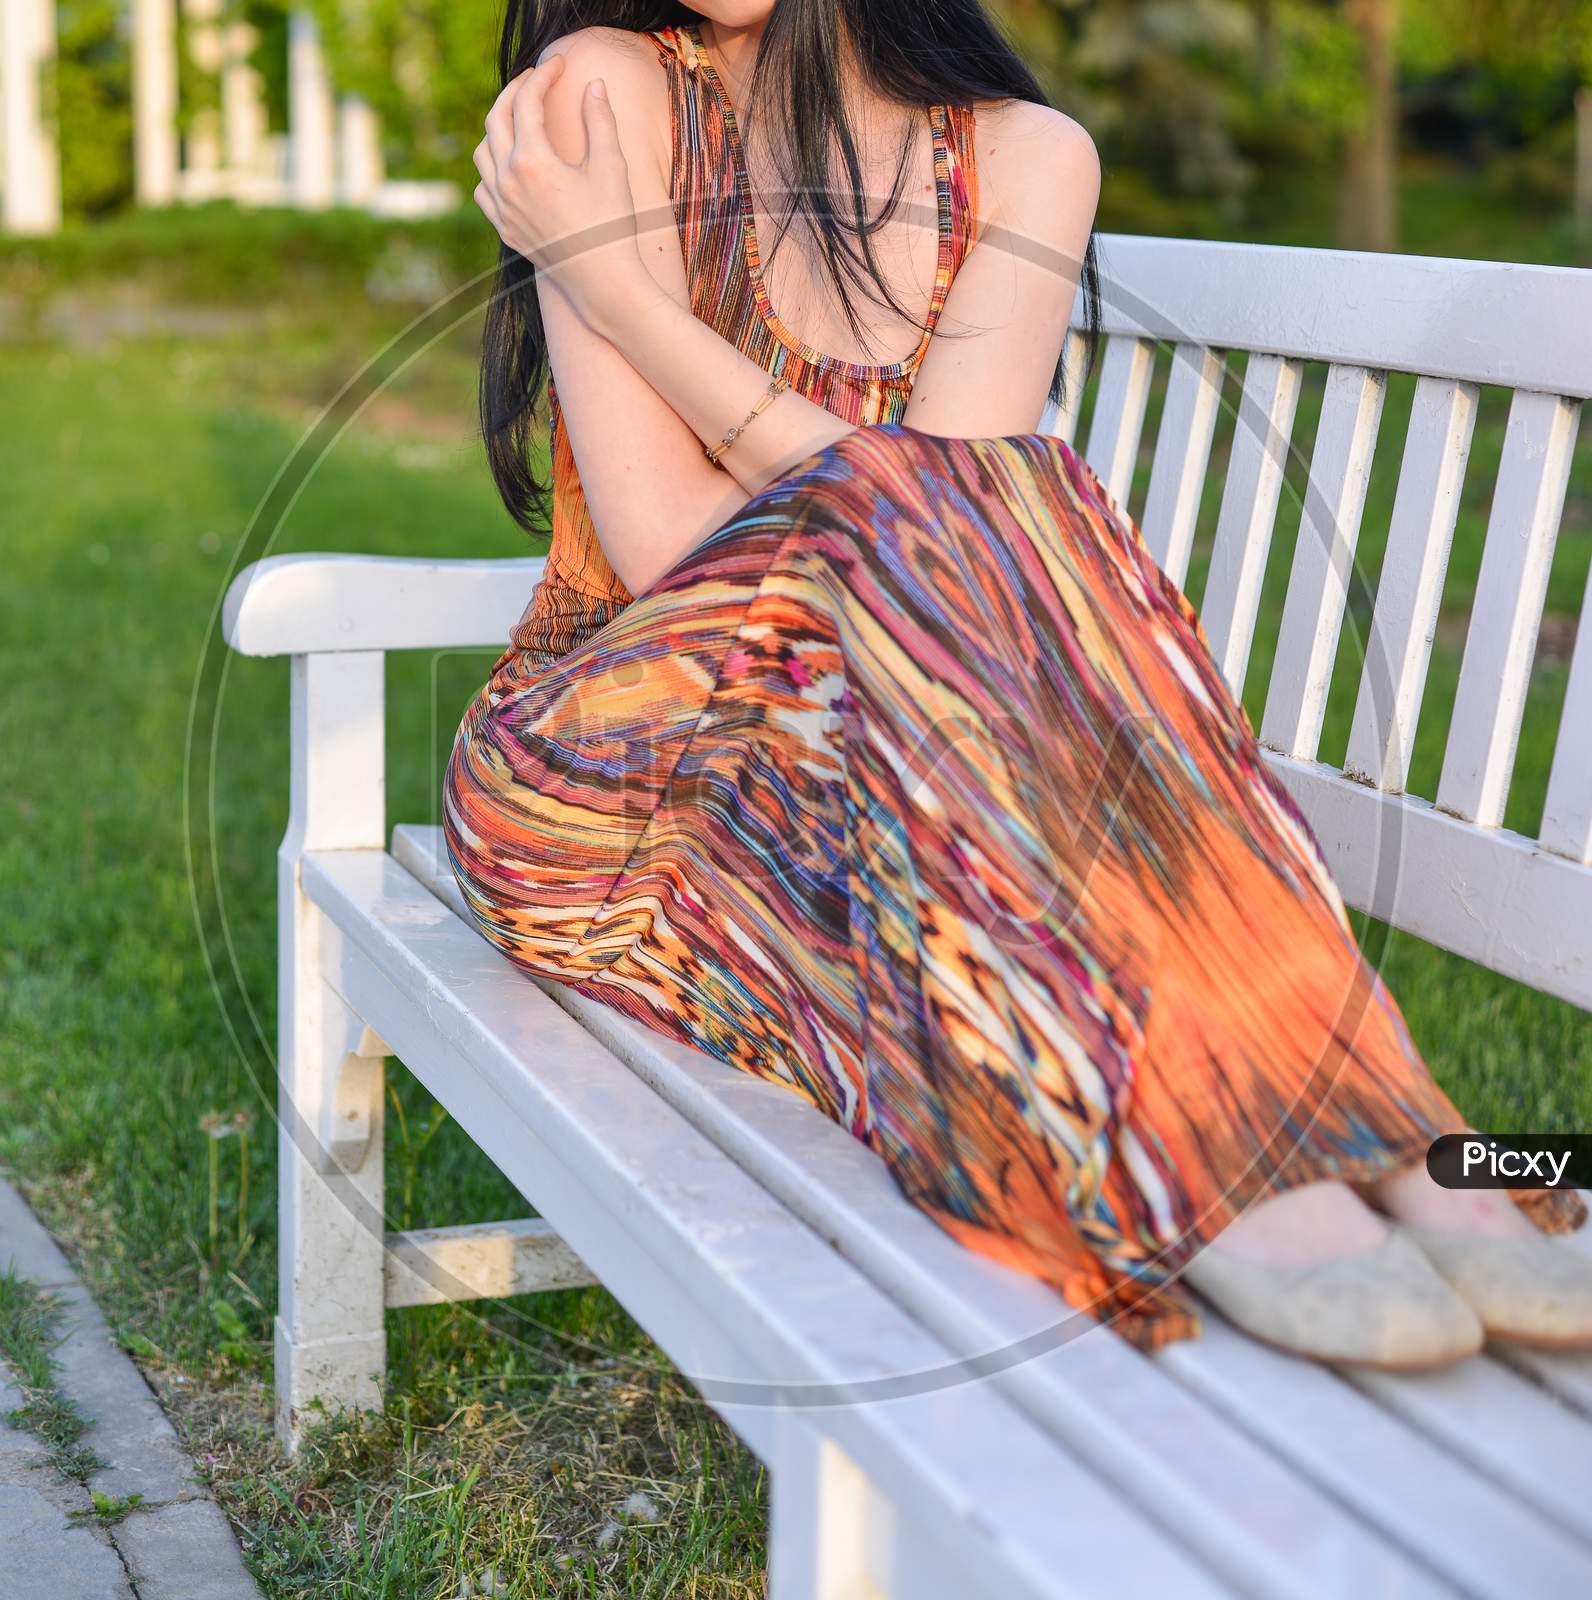 Timisoara, Romania - April 24, 2018: Beautiful Brunette Model With Long Hair Is Having A Photo Shooting In The Park. The Woman Is Wearing An Orange Long Summer Dress